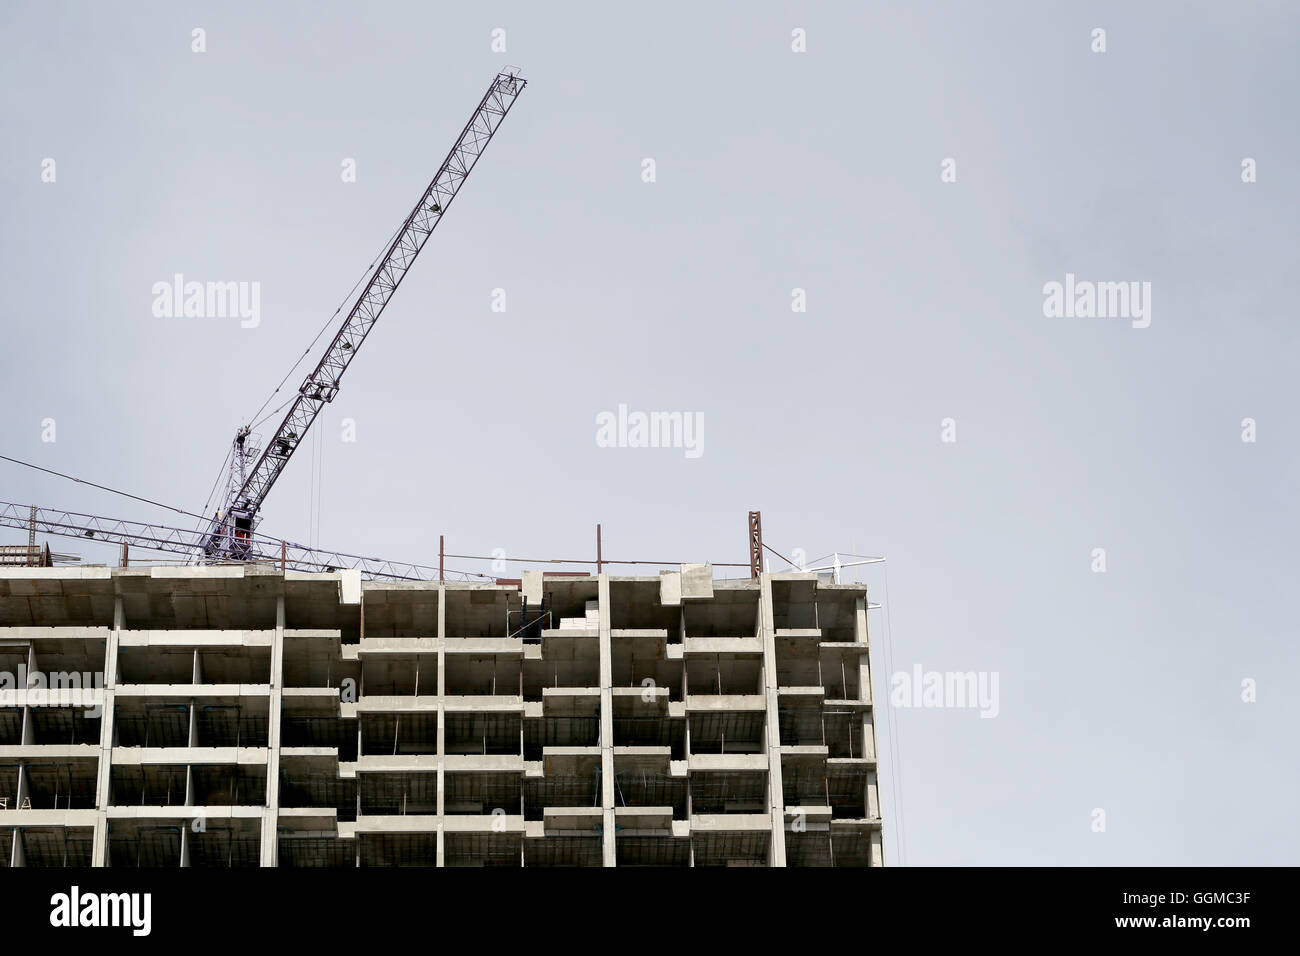 Crane working on a building under construction in gray background. Stock Photo